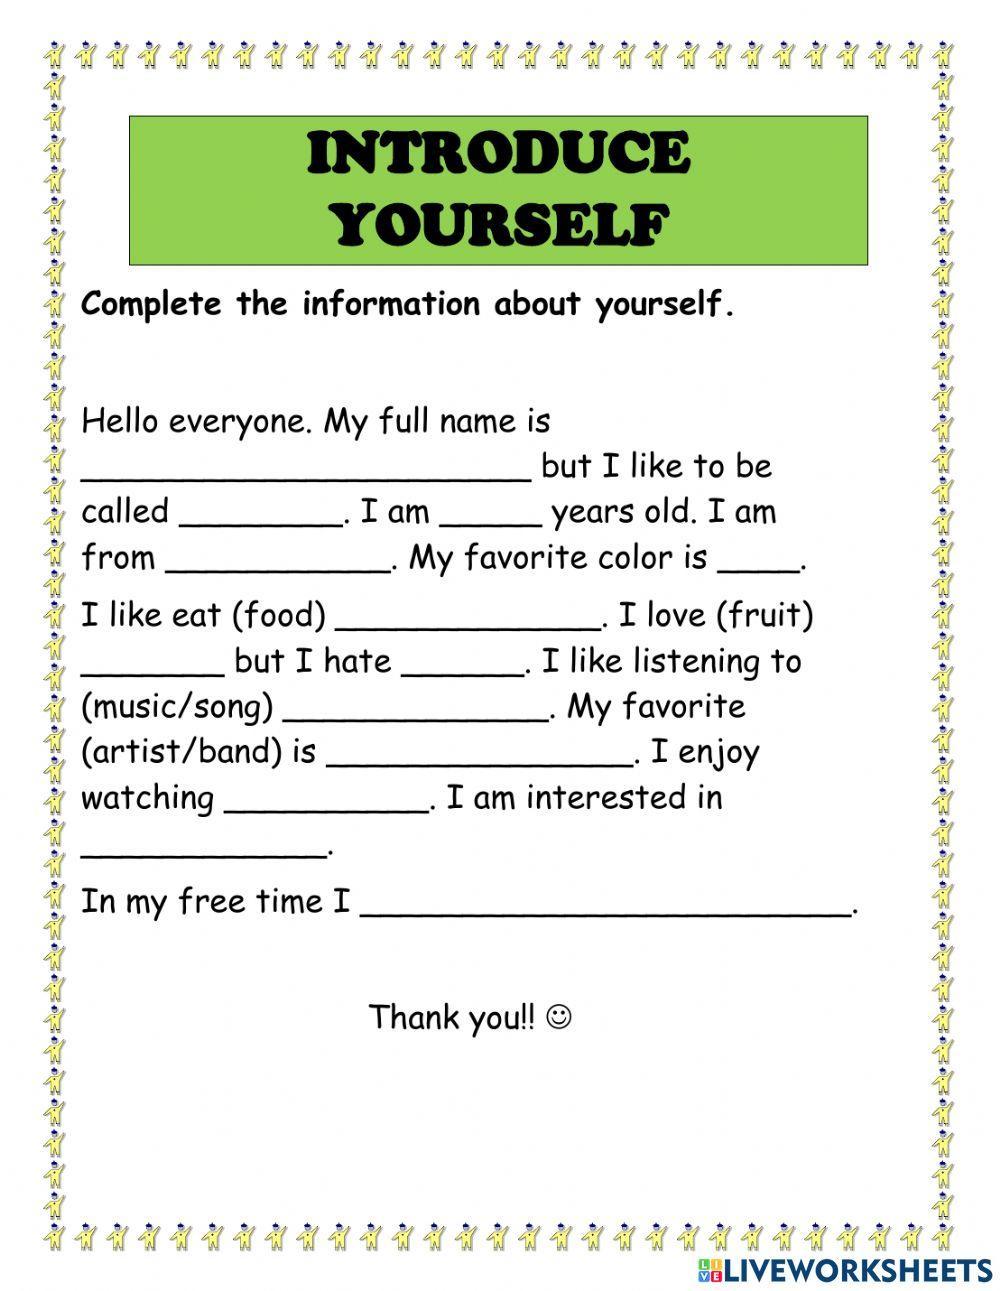 Introduce yourself worksheet for A1 | Live Worksheets